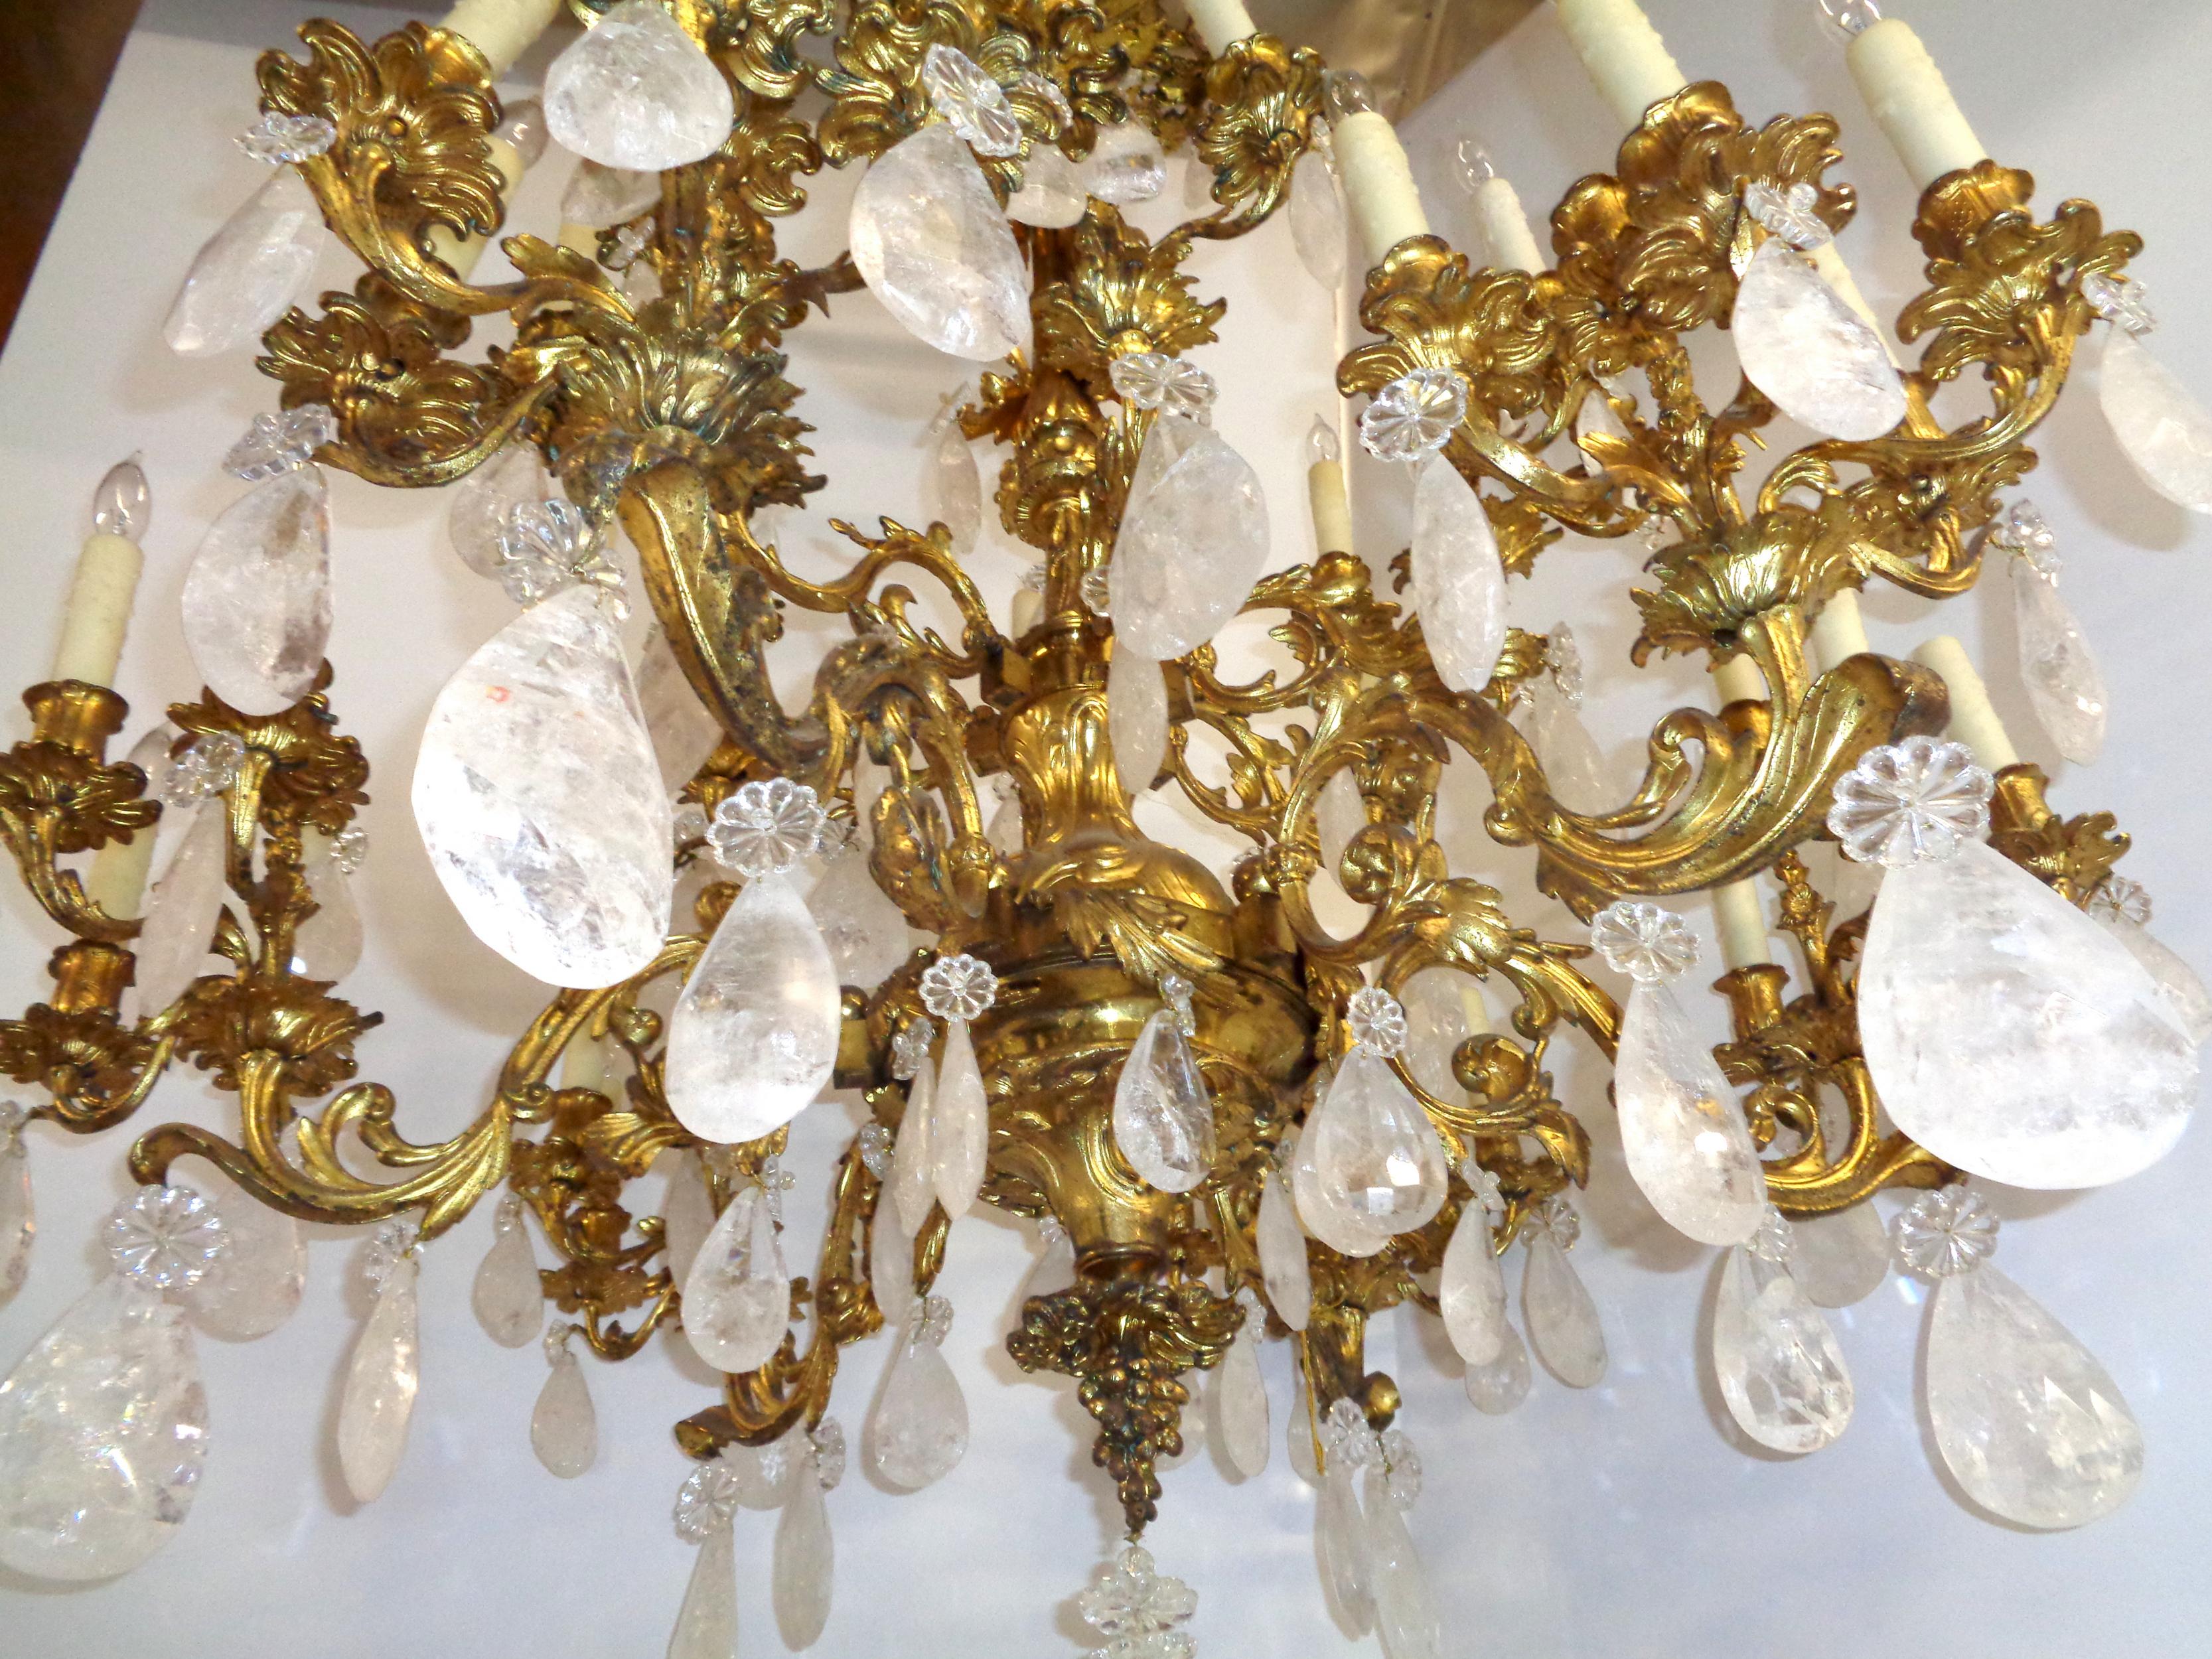 Palatial French Louis XV style bronze doré chandelier with multi-shaped and faceted Baccarat and rock crystals. This magnificent chandelier is beautifully made and has the highest quality craftsmanship. It has six crystal poniards and thirty-tiered